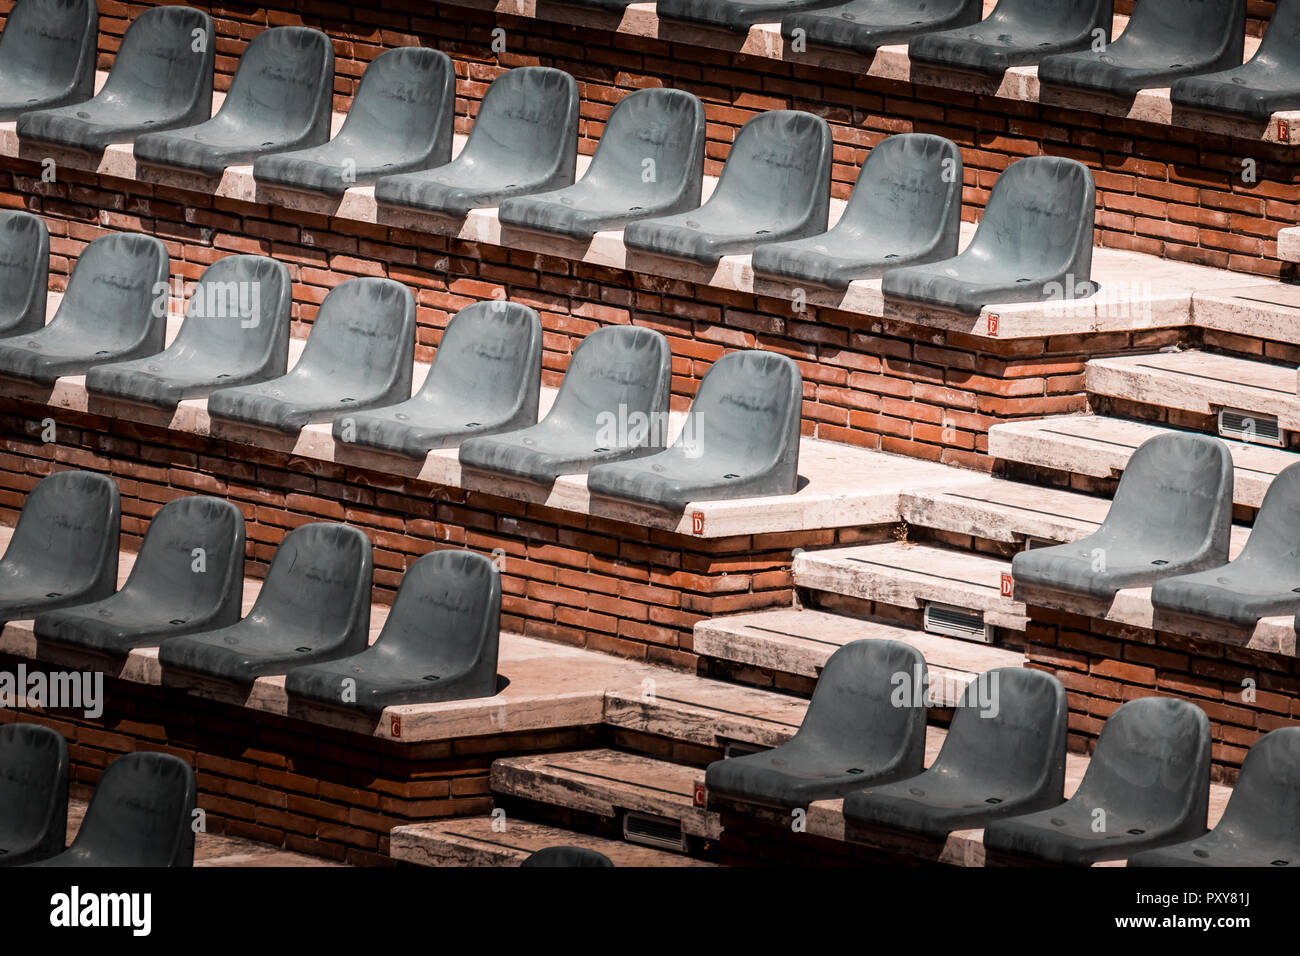 Free unclaimed seats in multiple rows. Sunset photo in empty public arena and concert amphitheatre. Red brick and white travertine structure. Stock Photo